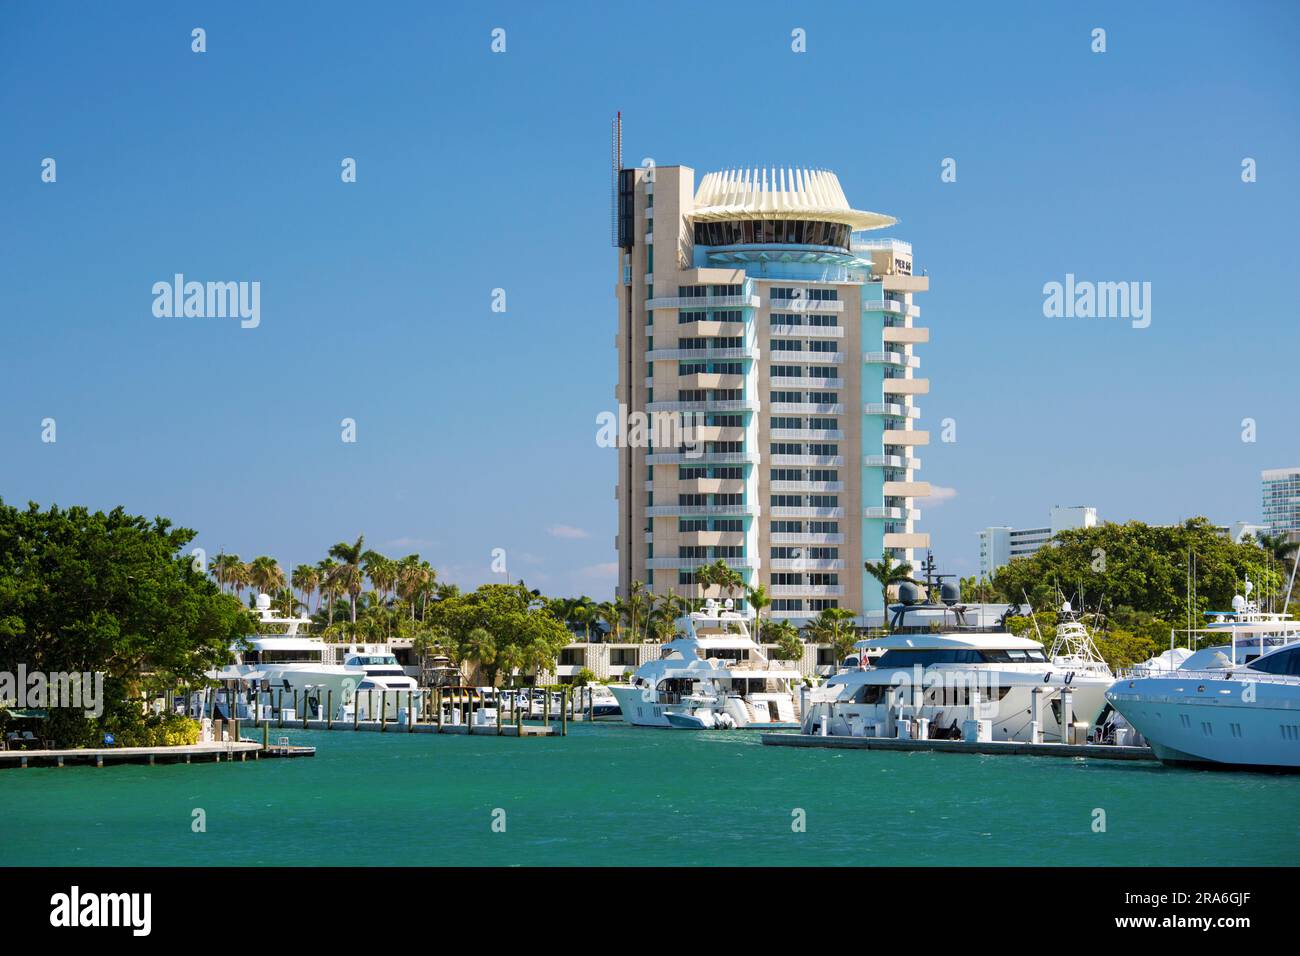 Fort Lauderdale, Florida, USA. View across the Stranahan River to the Pier 66 hotel and marina complex, Harbor Beach district. Stock Photo